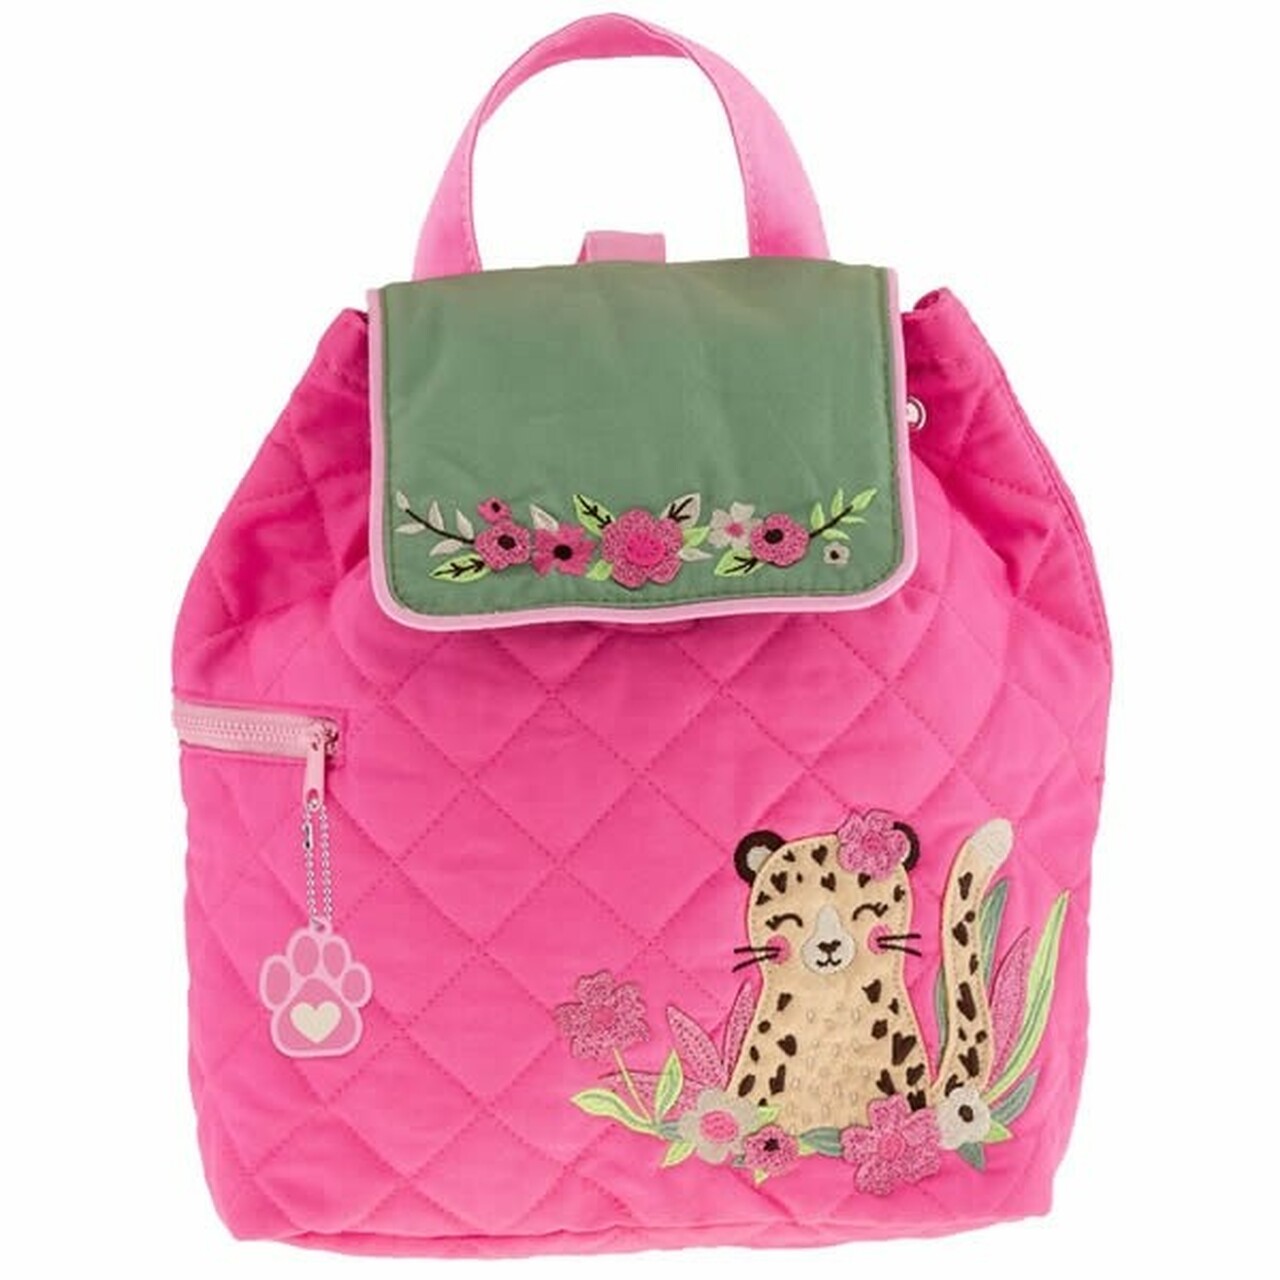 Quilted back pack - Stephen Joseph - Leopard pink